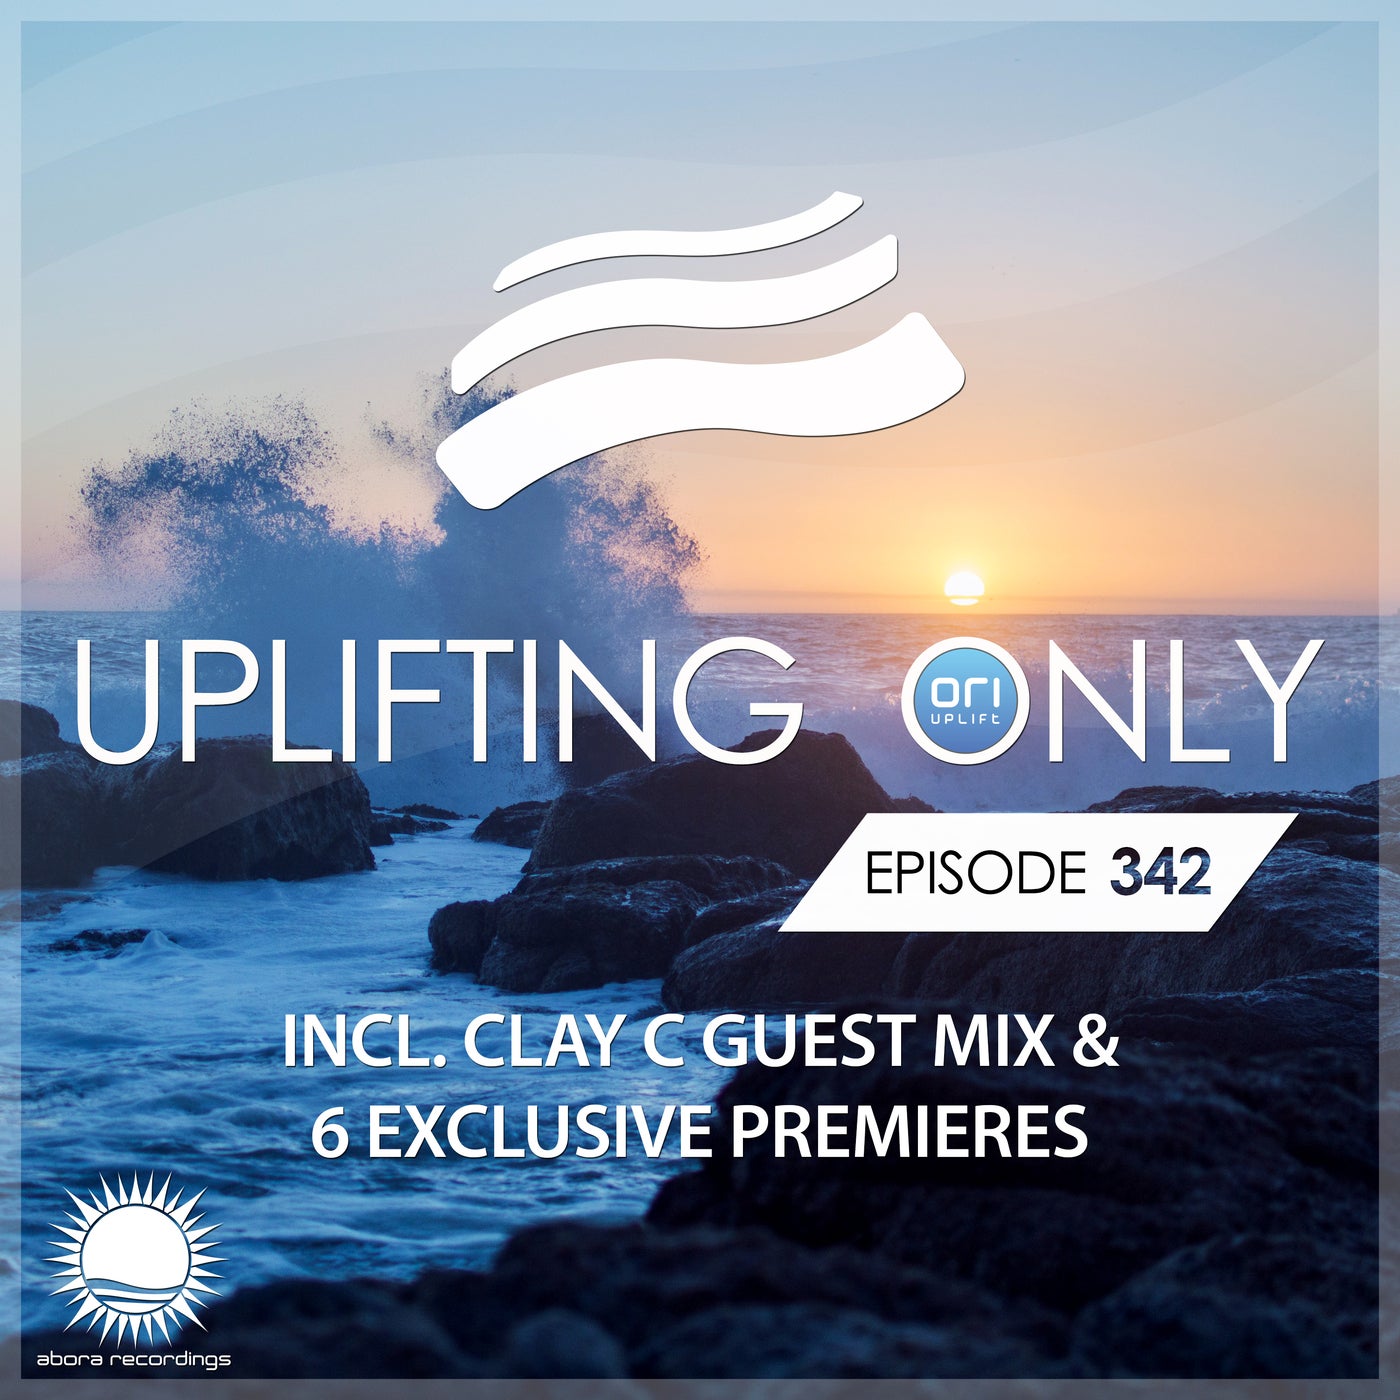 Uplifting Only Episode 342 (Without Guestmix) (Aug 29, 2019)